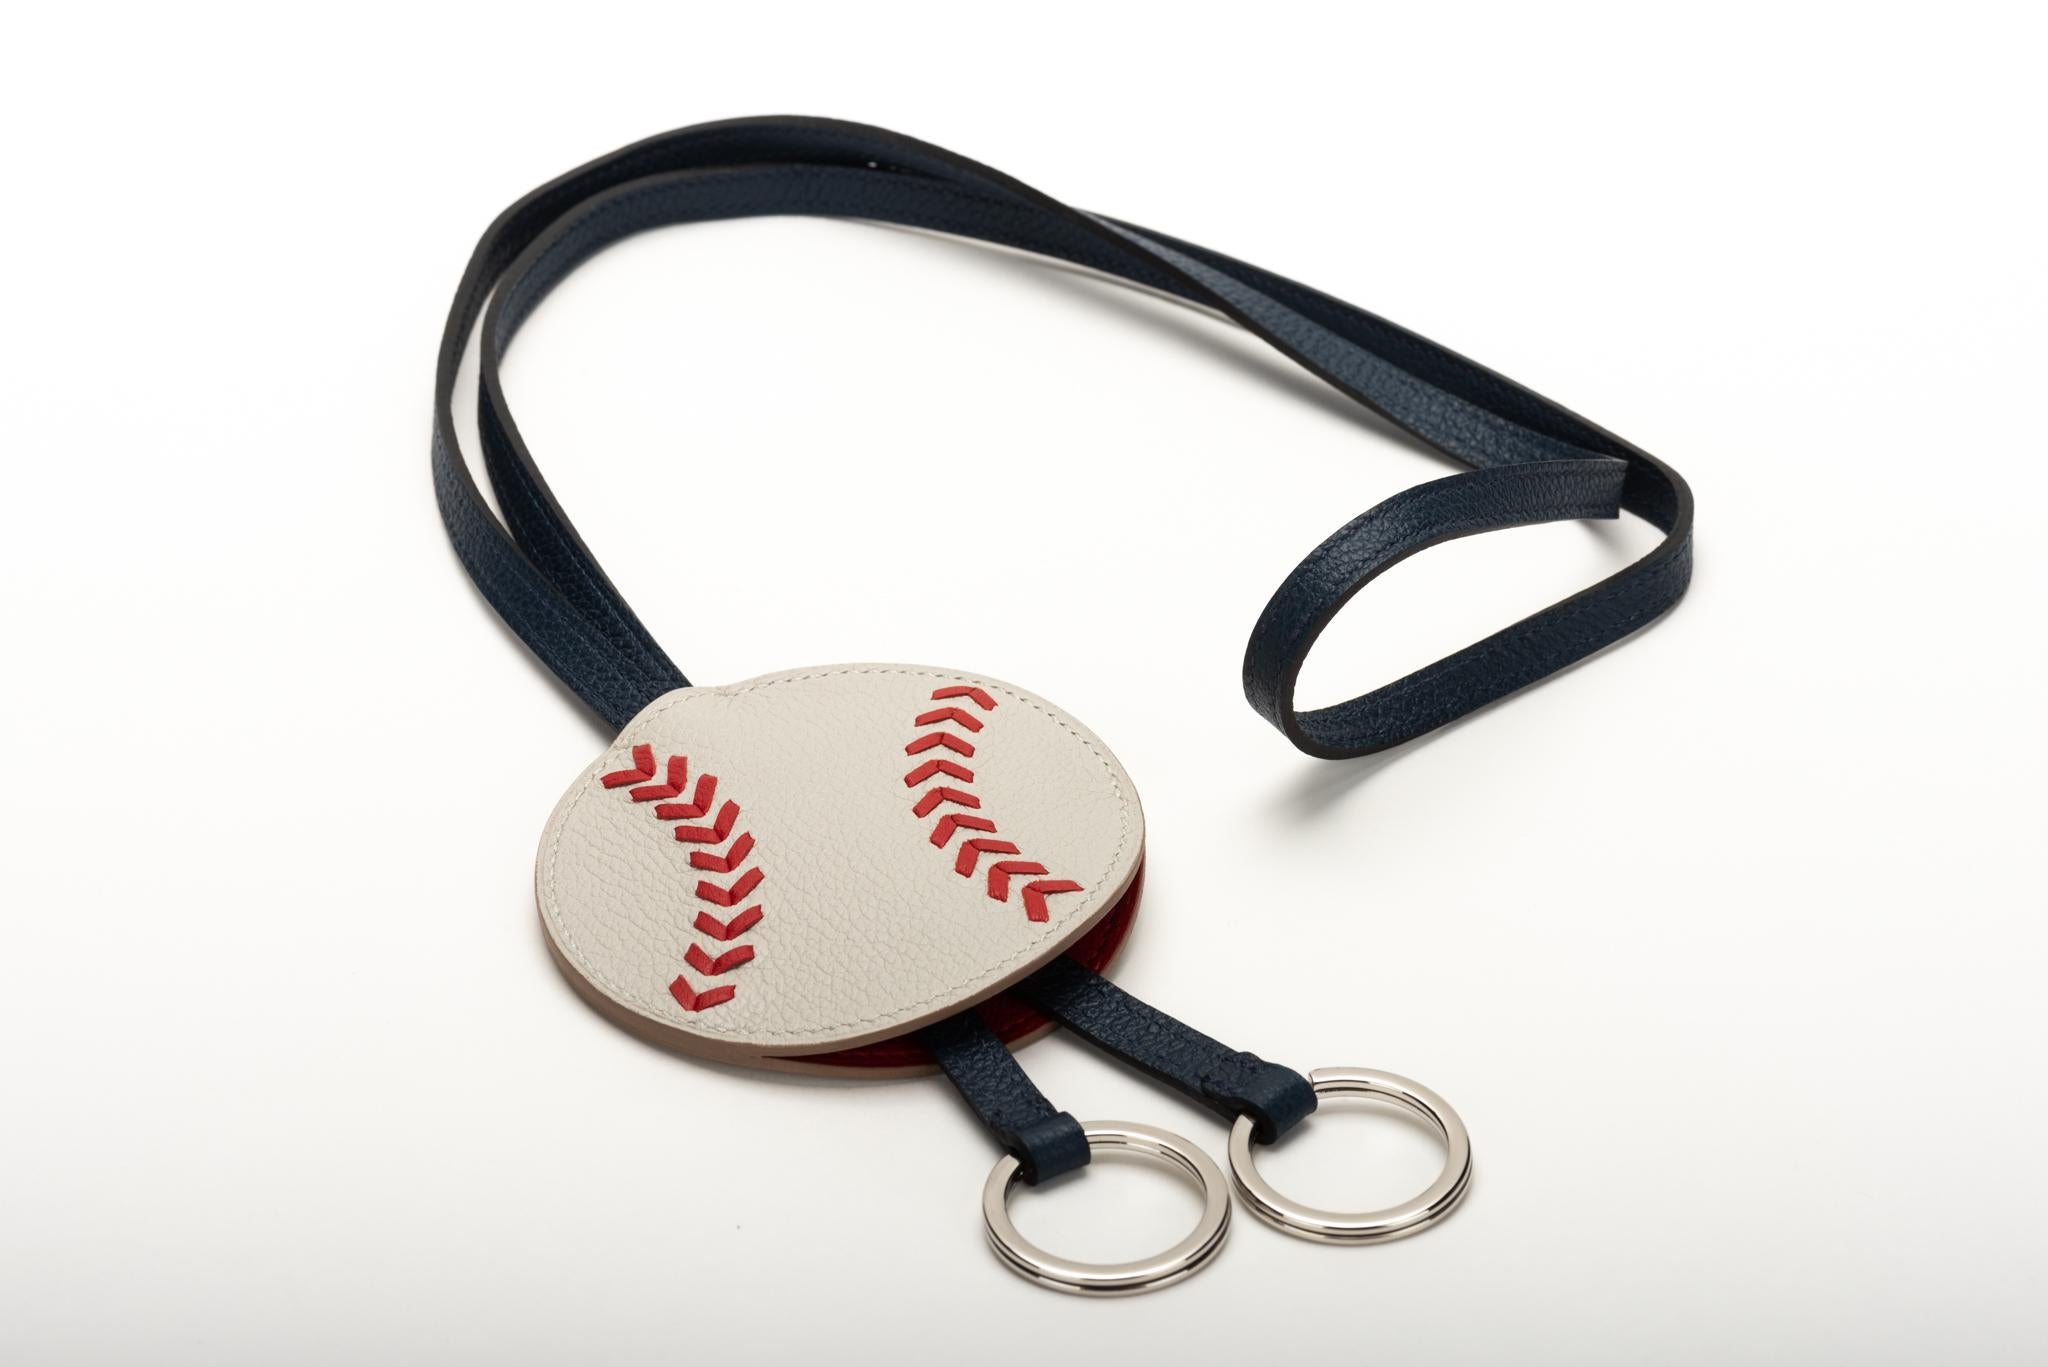 Hermes rare baseball collection keychain in blue, red and white. Comes with original box, ribbon and shopping bag.
